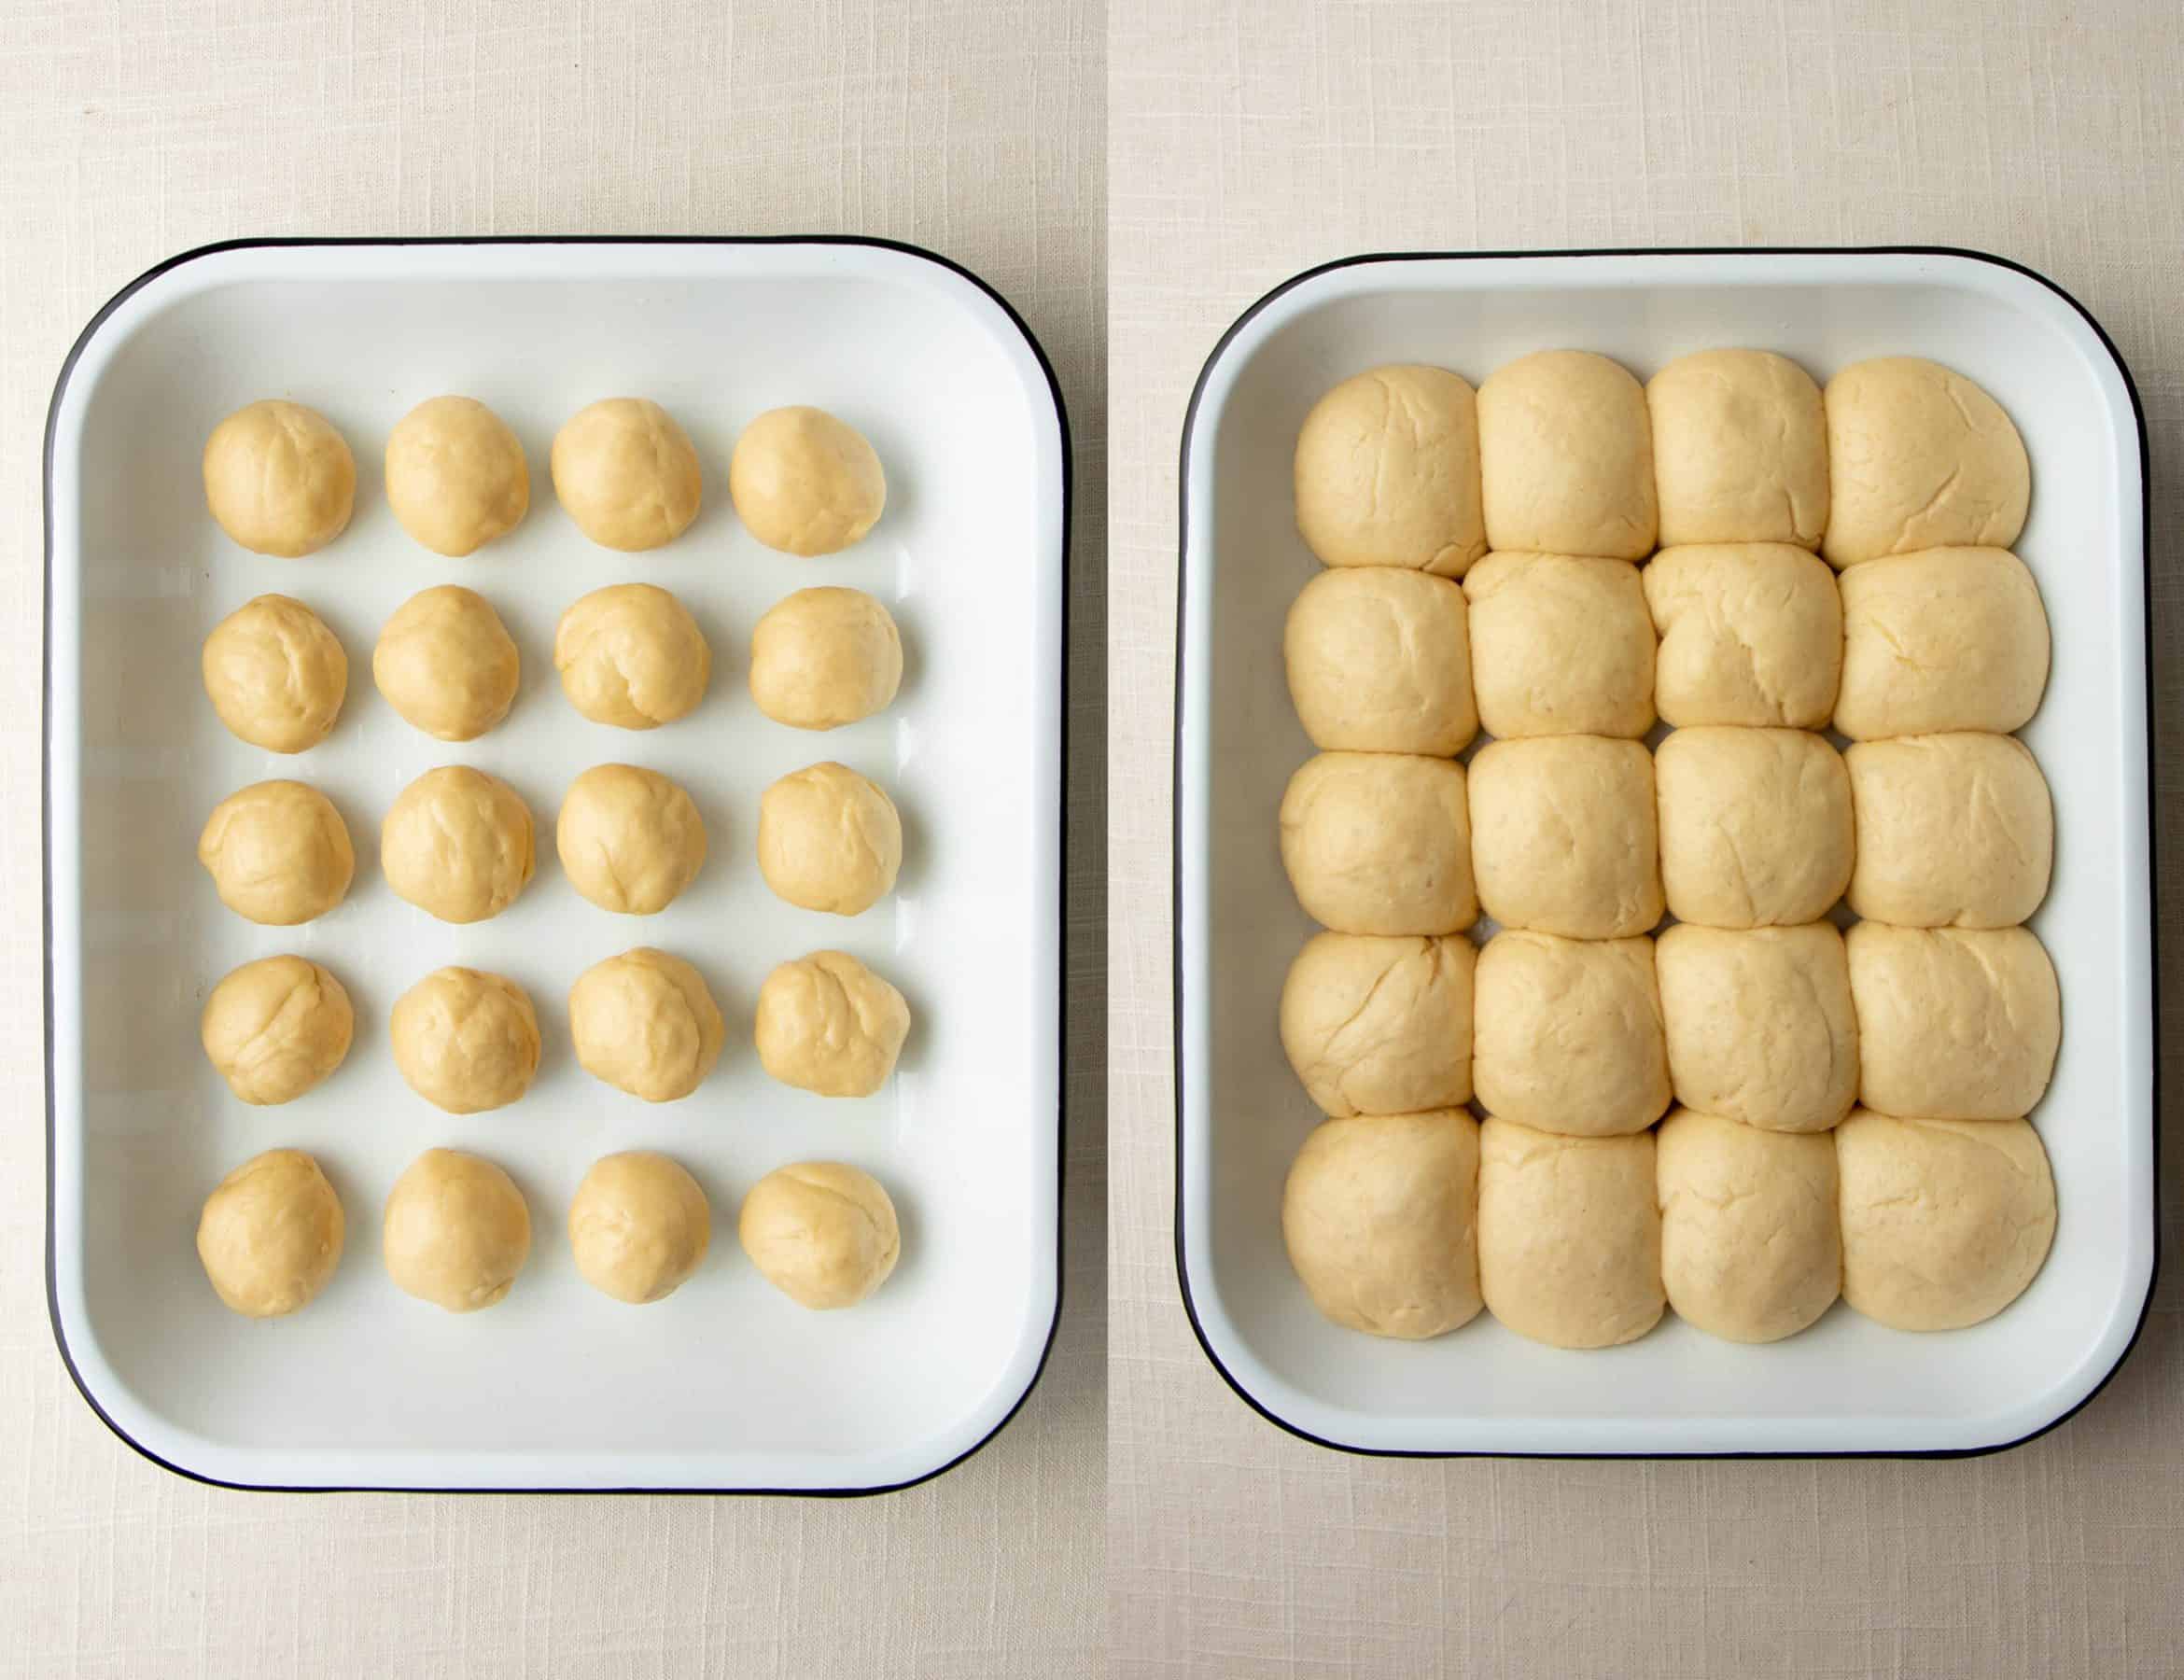 A split image with balls of bread dough on the left, and dough after rising on the right.